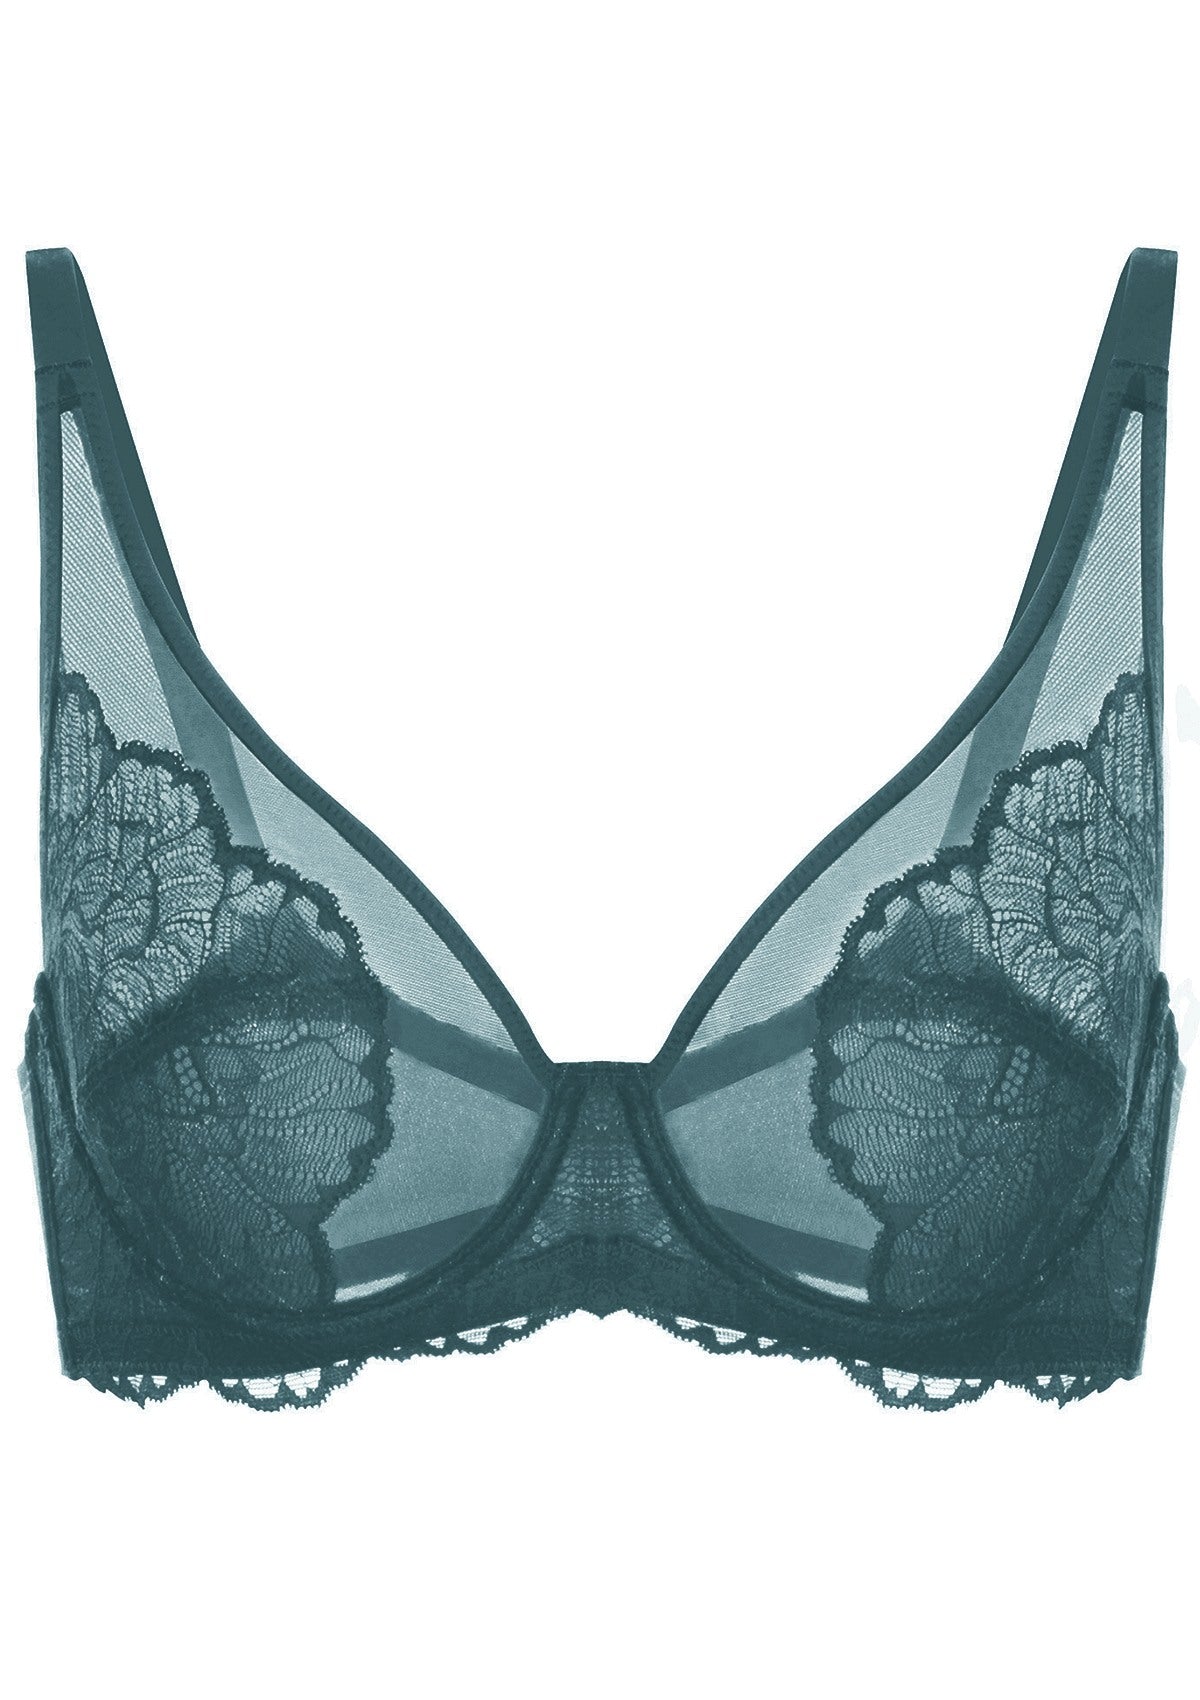 HSIA Blossom Full Figure See-Through Lace Bra For Side And Back Fat - Dark Blue / 40 / C